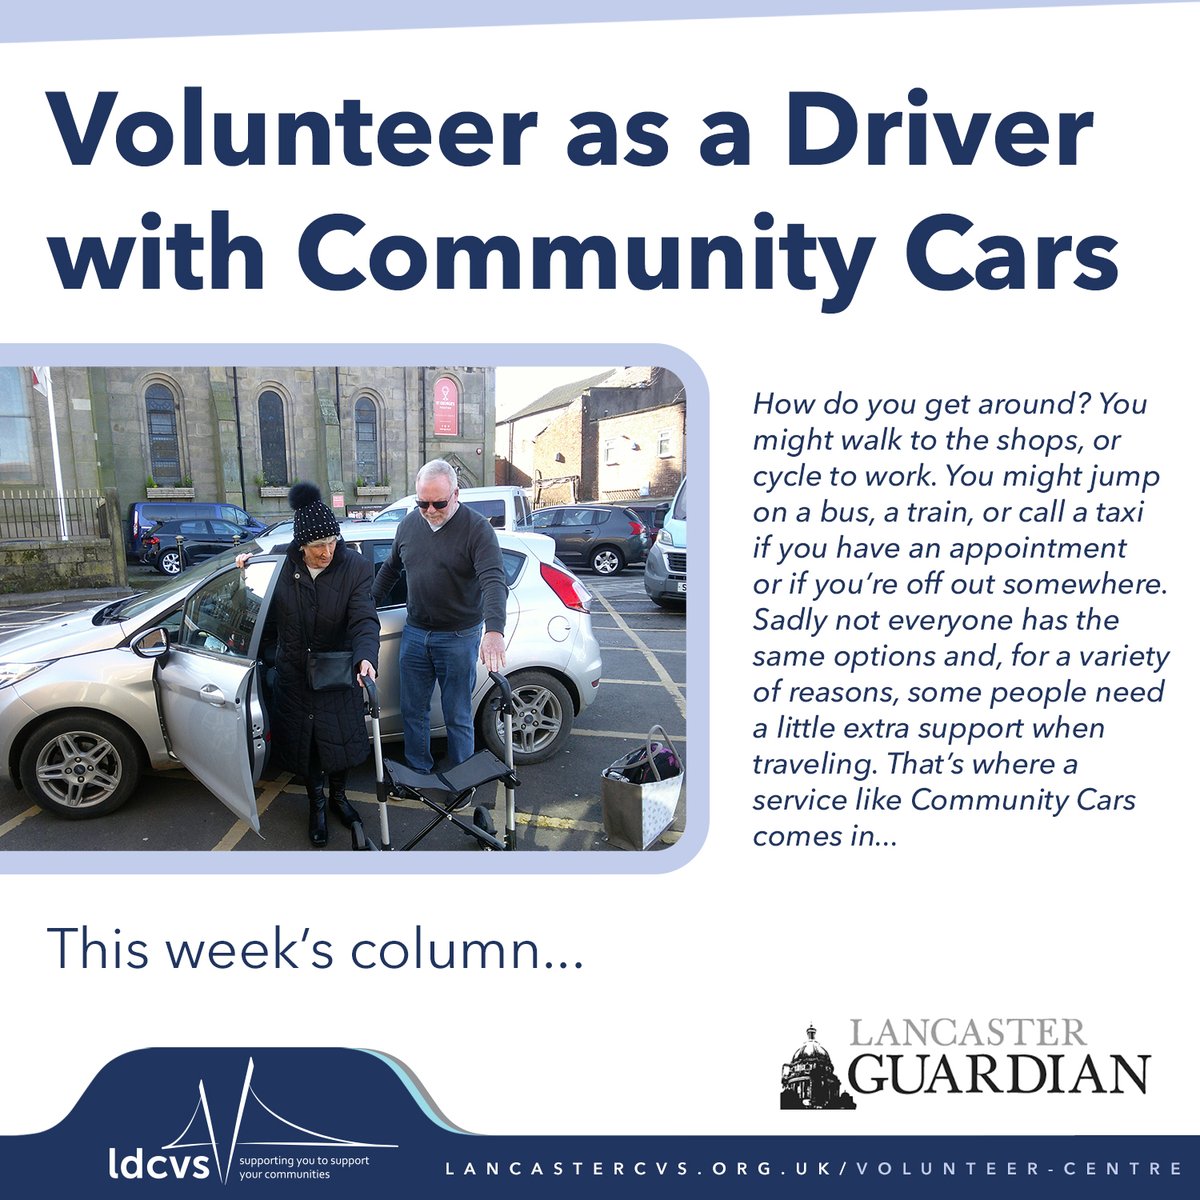 🚗💛Make a difference in your community by becoming a volunteer driver for #CommunityCars! Read more in our latest @GuardianDigital column 👉tinyurl.com/4374ns2w We’ll be holding a 1-hour briefing on Tues, March 26 at 1pm at The Cornerstone in Lancaster #VolunteerOpportunity